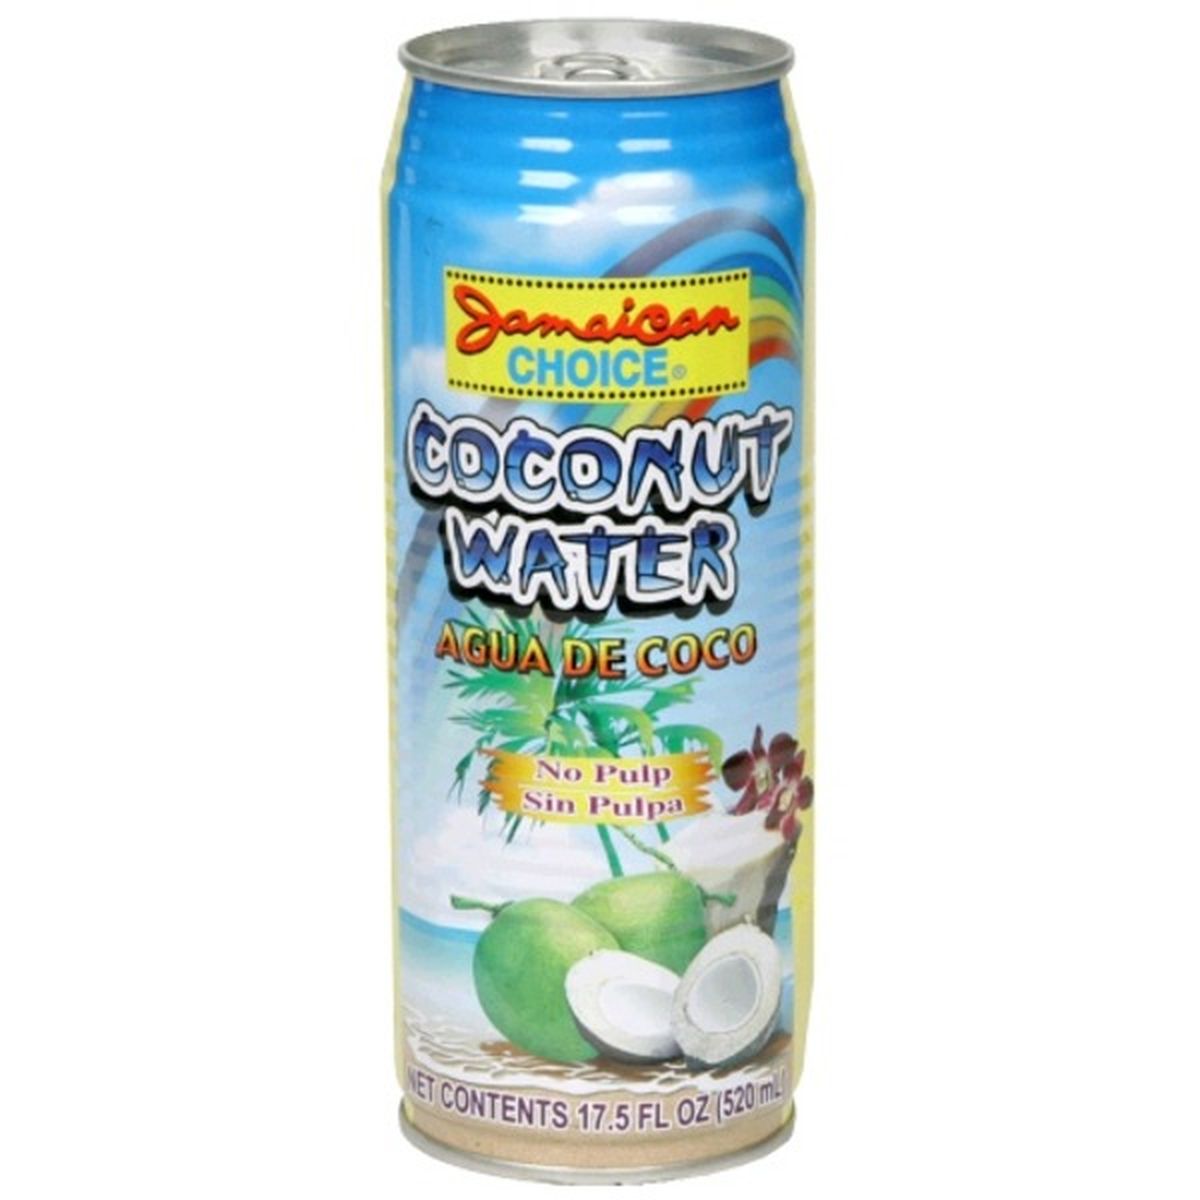 Calories in Jamaican Choice Coconut Water, No Pulp